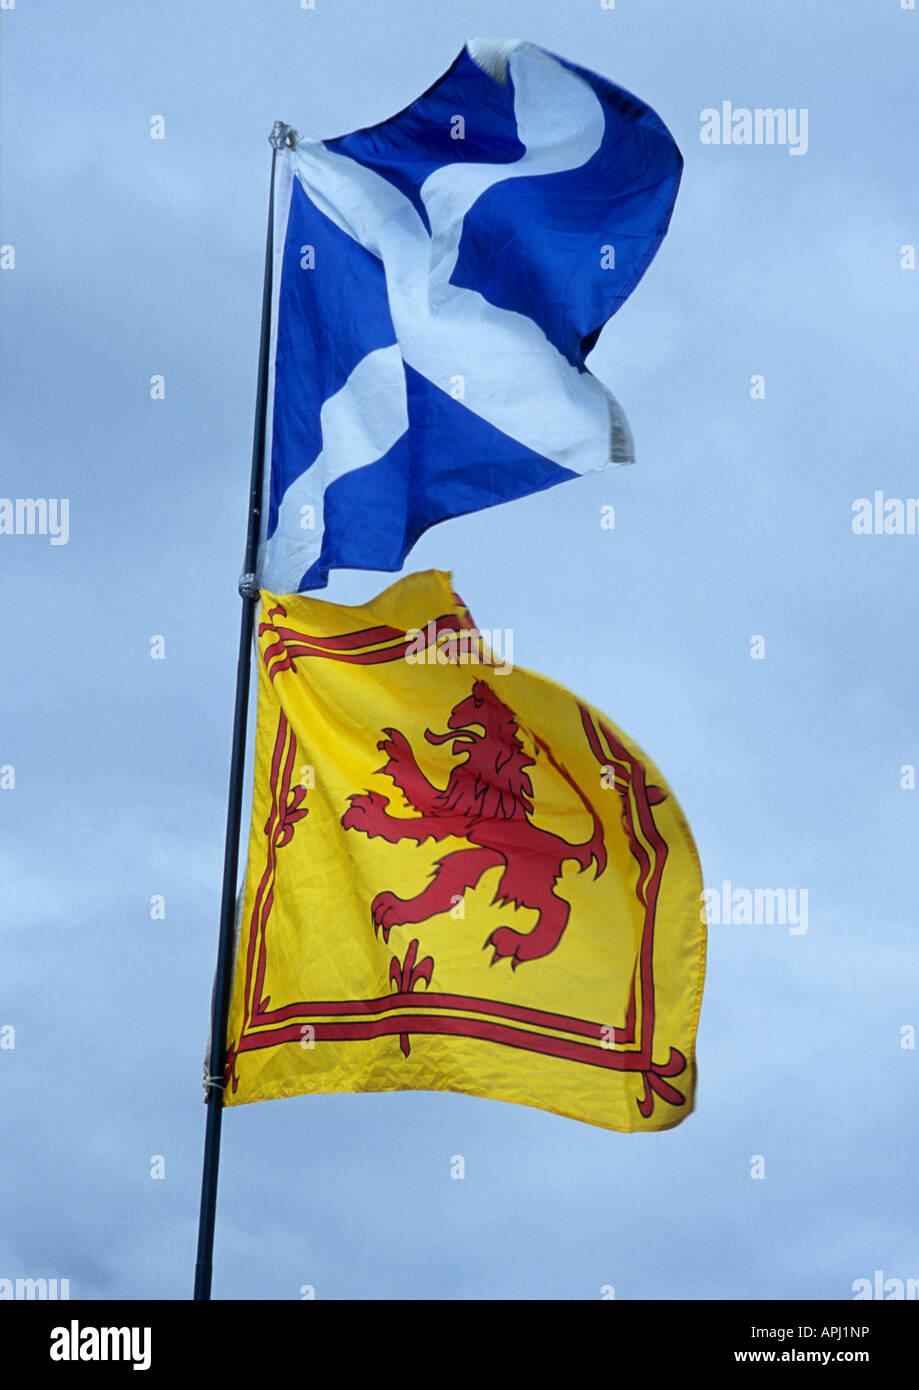 PACK OF 20 SCOTTISH FLAGS SERVIETTES/NAPKINS WITH SALTIRE AND LION RAMPANT FLAGS 